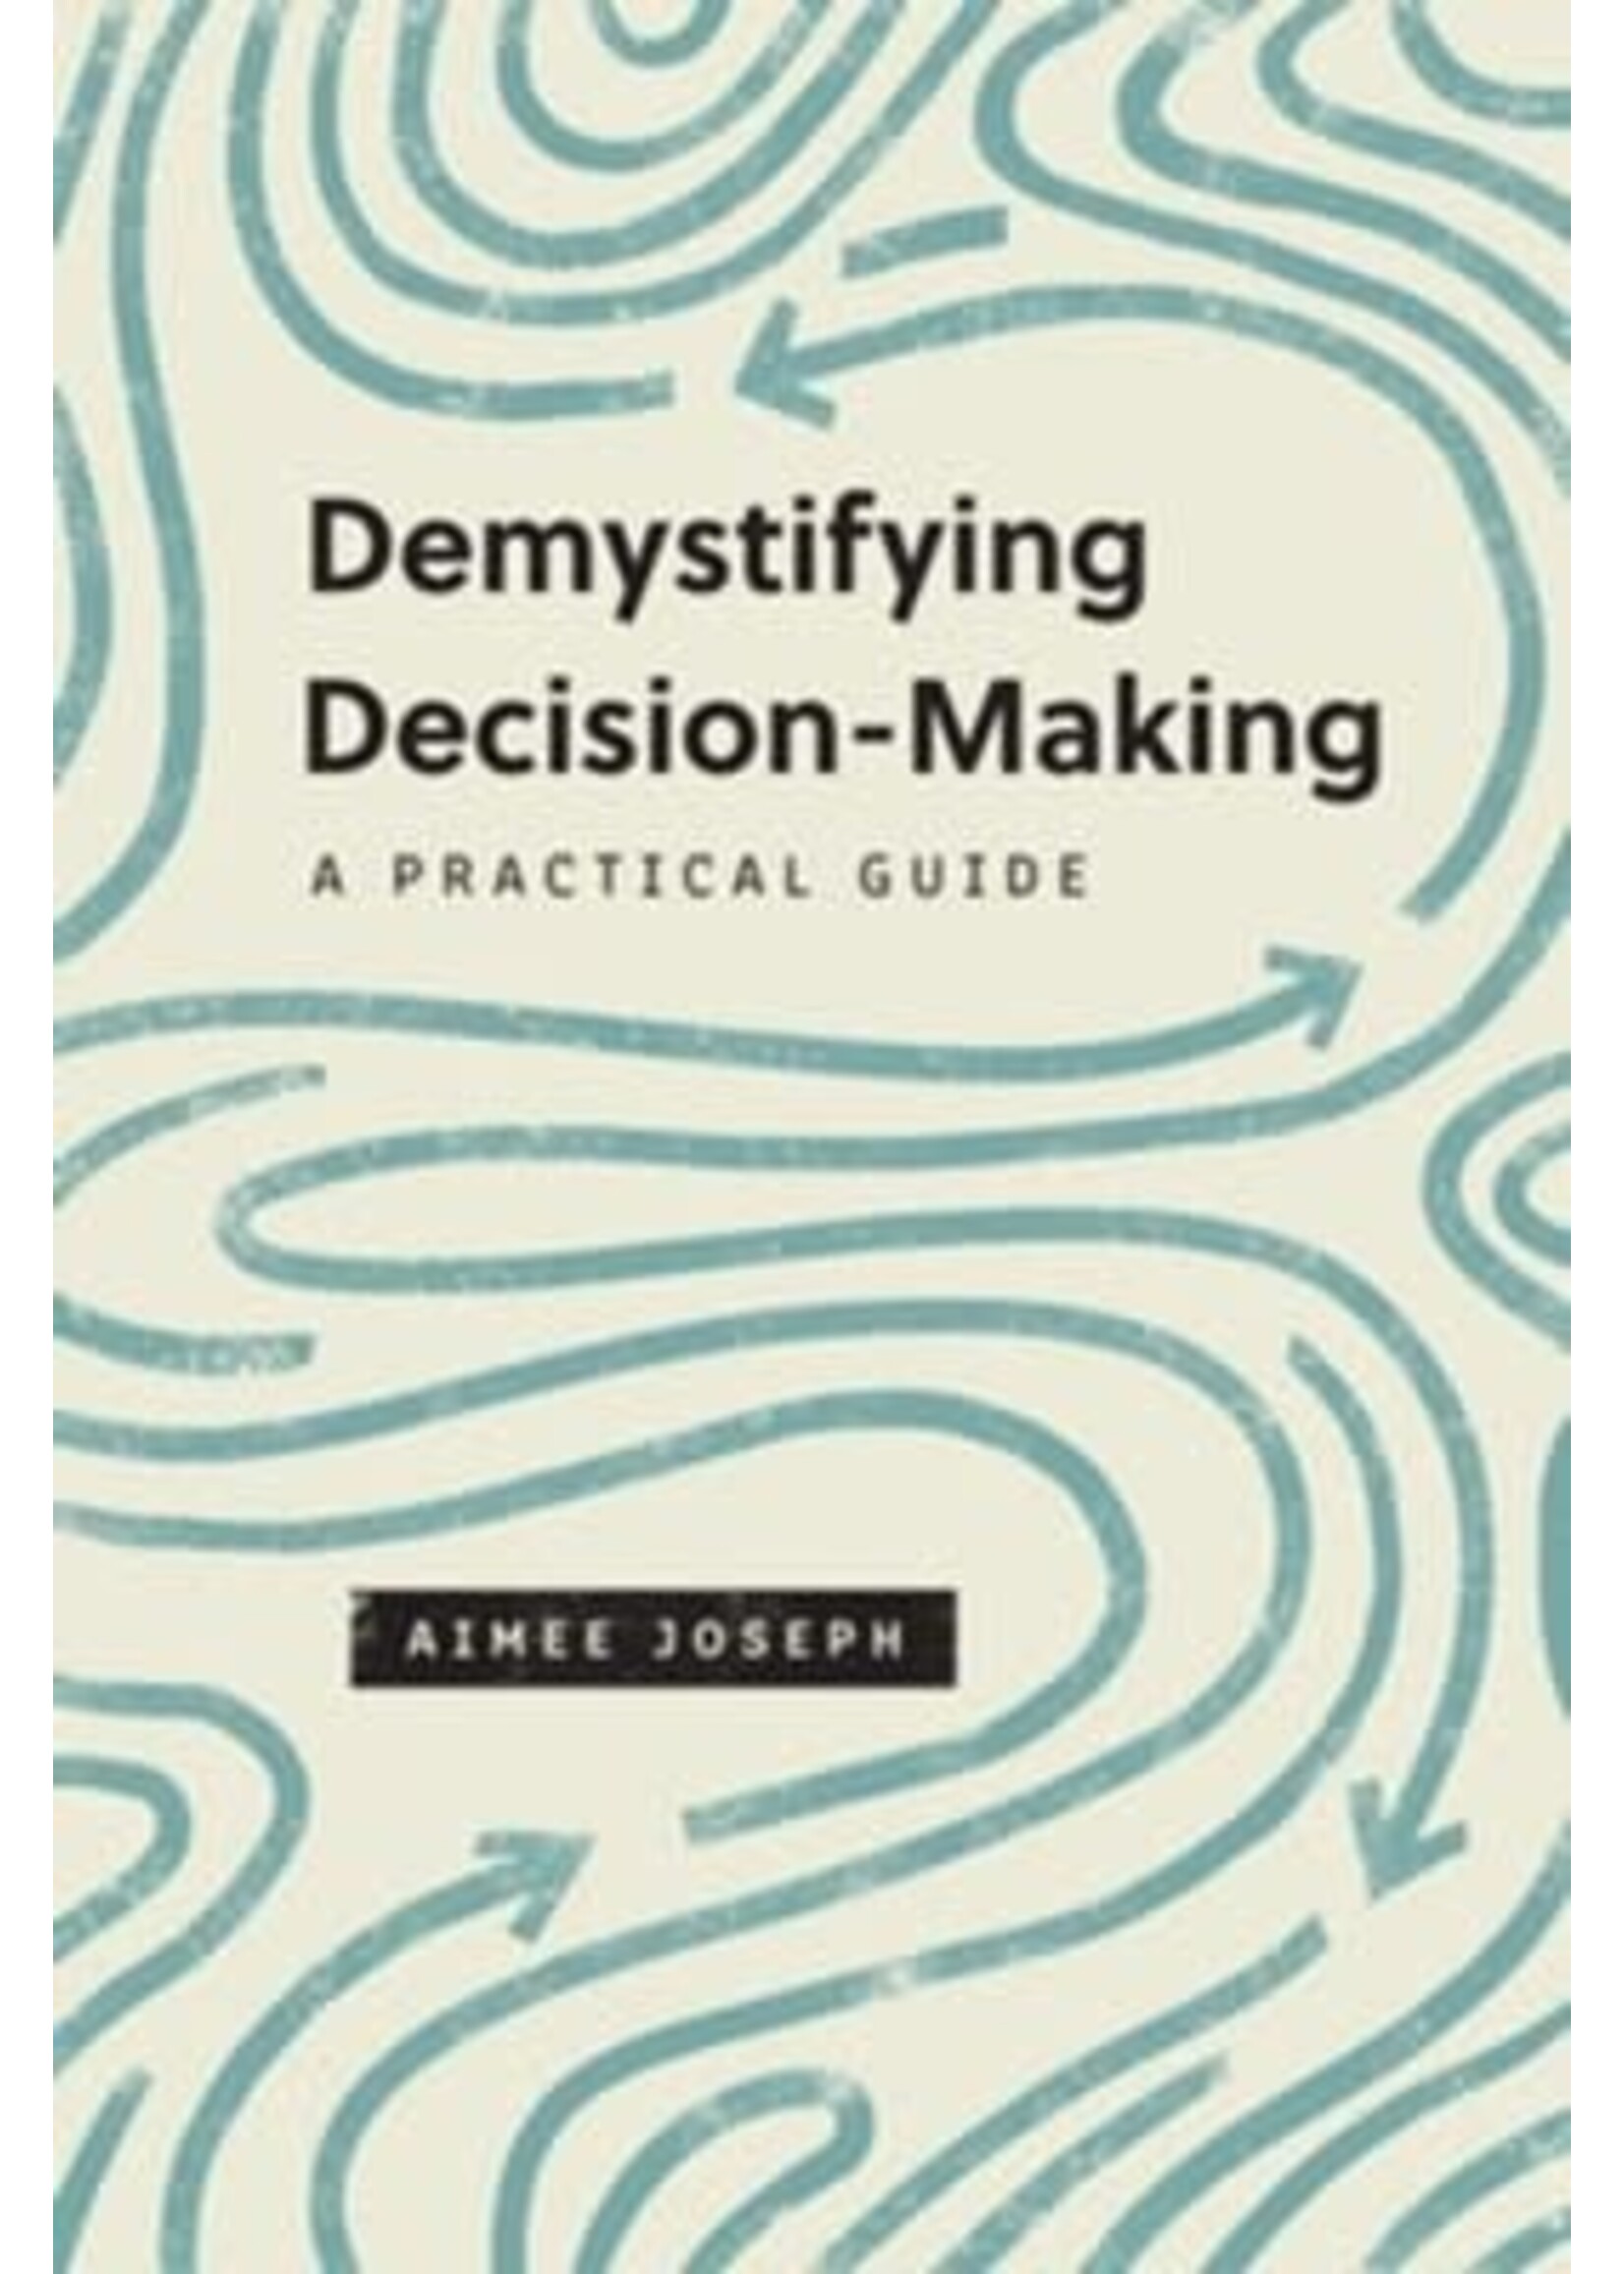 Demystifying Decision-Making: A Practical Guide [Aimee Joseph]